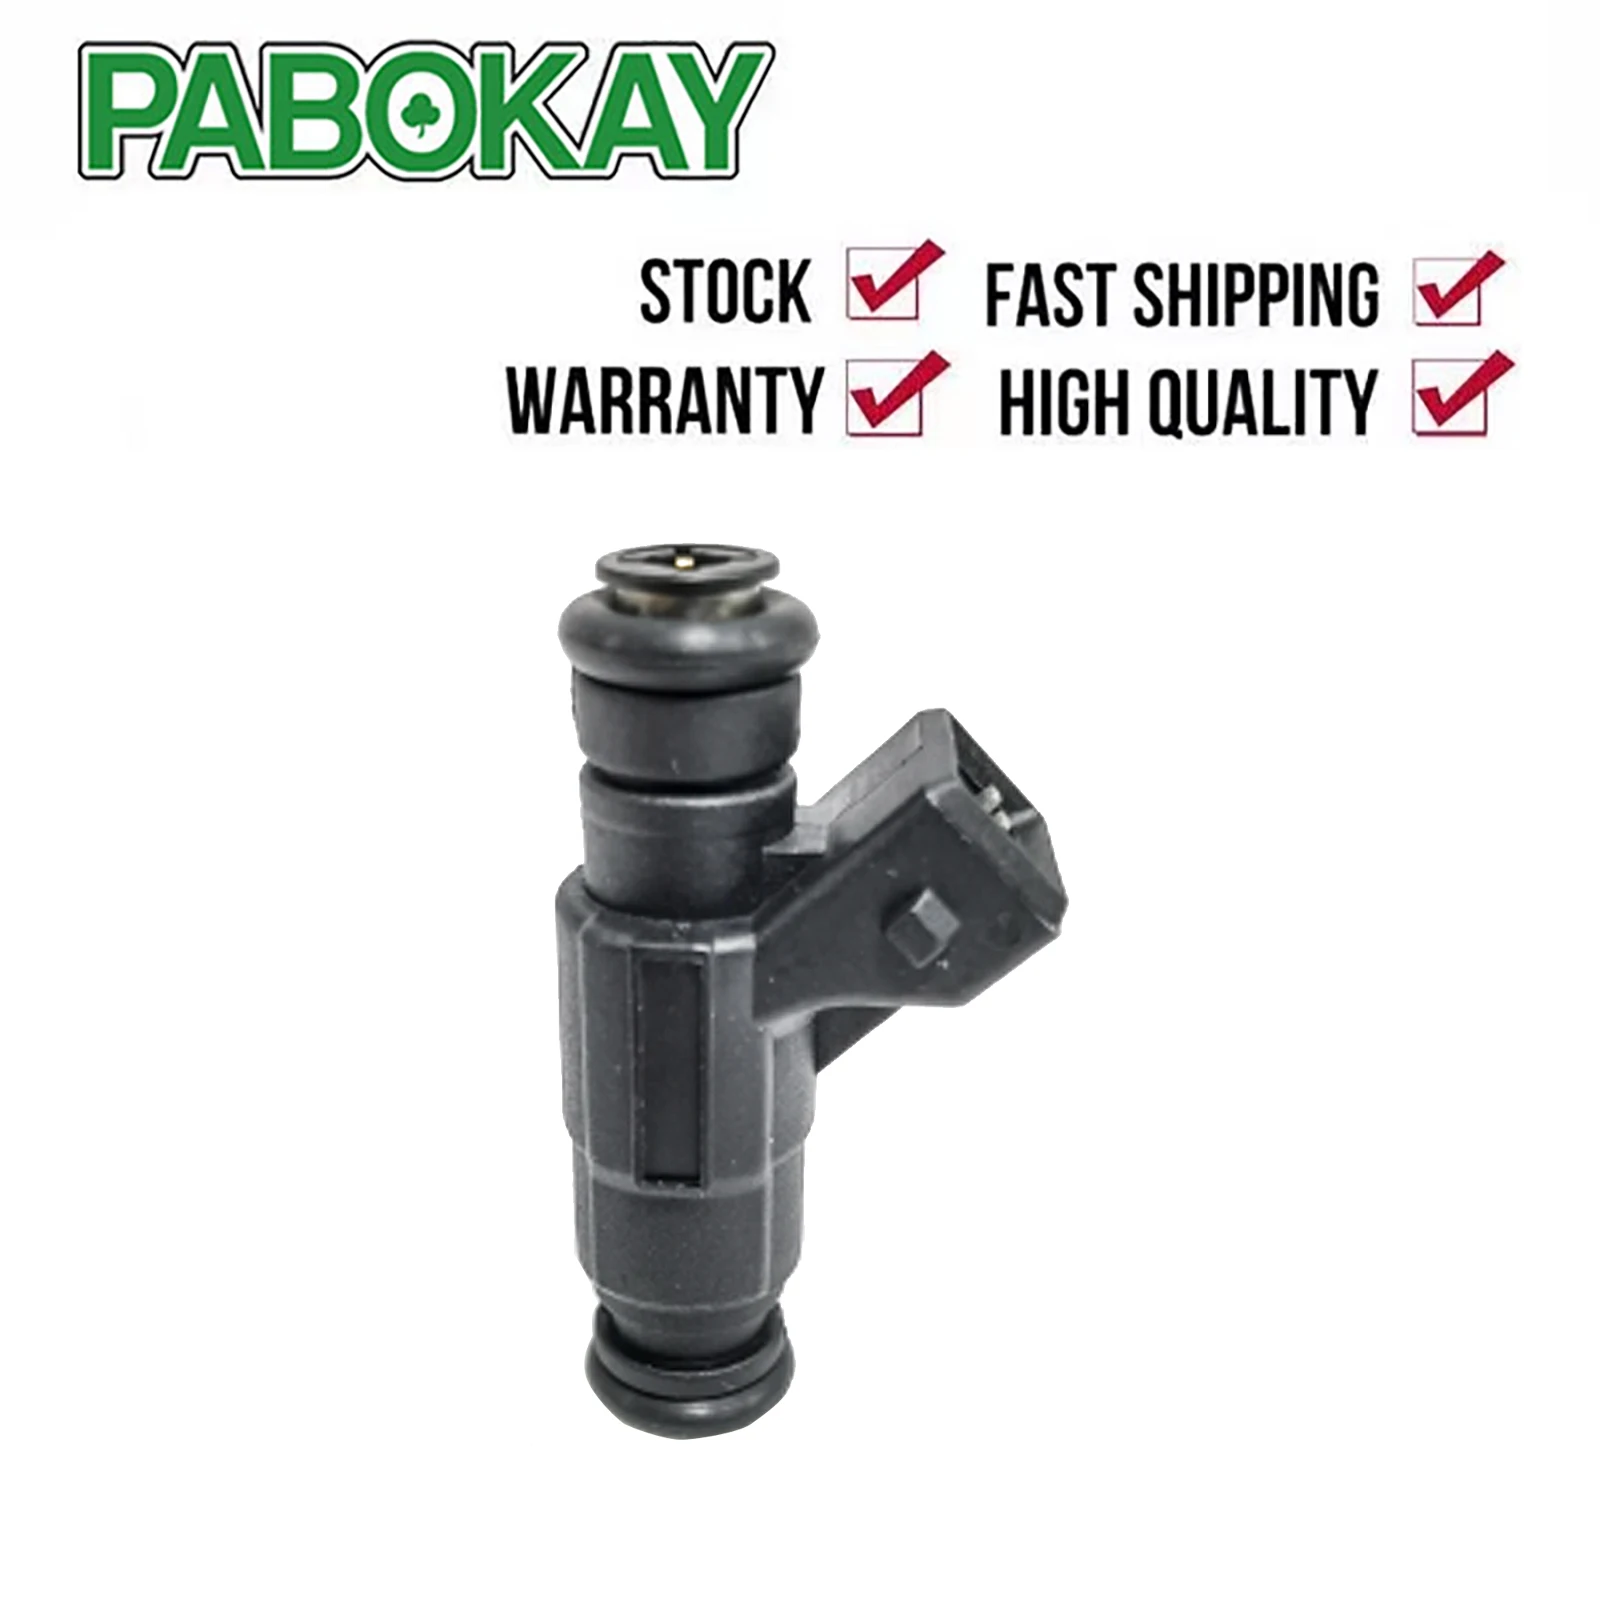 

0280155921 077133551M fuel injector for VW Touareg Audi A6 A8 S8 4.2L V8 2000-2007